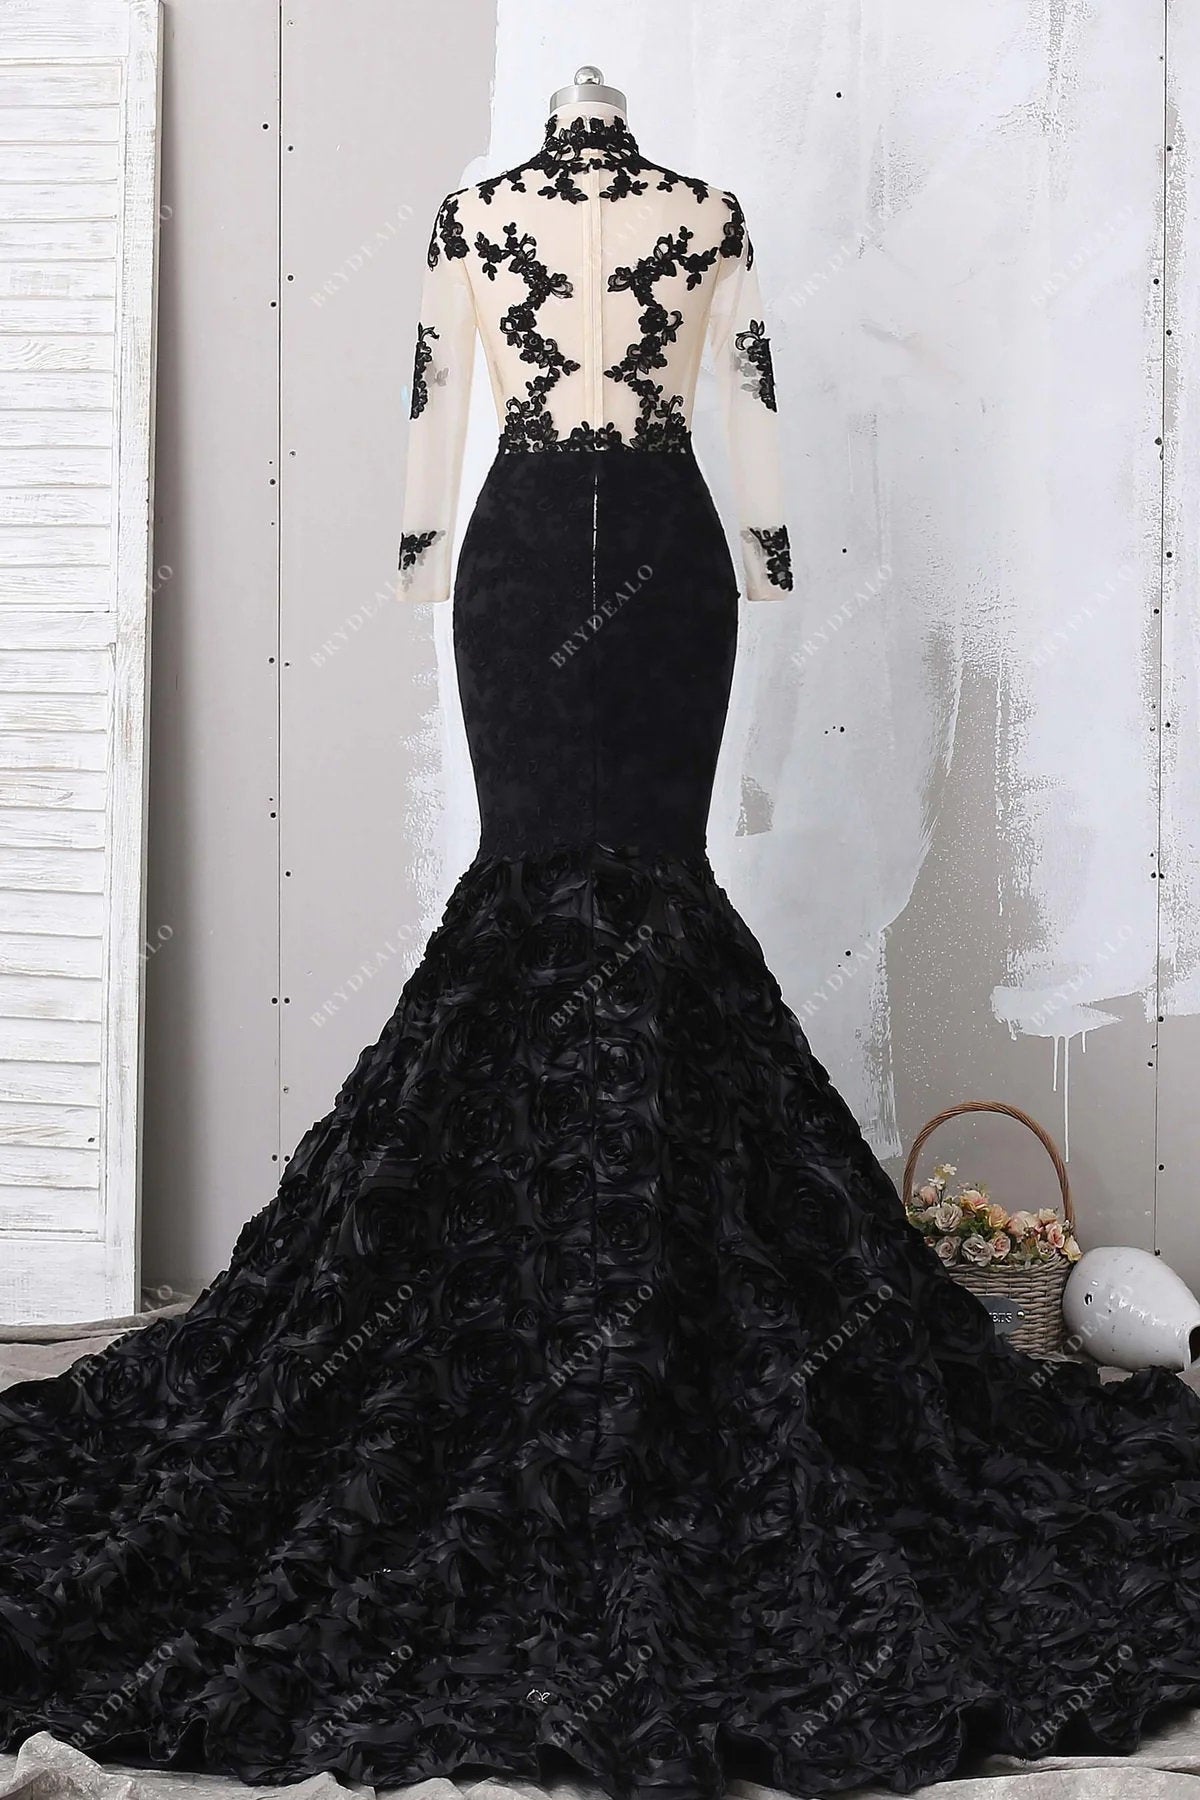 Black Illusion Sheer Lace Long Sleeve Wedding Dress 3D Rosette Train Bridal Gown Unique Design Gothic Queen Sexy Plunging Neckline Mermaid